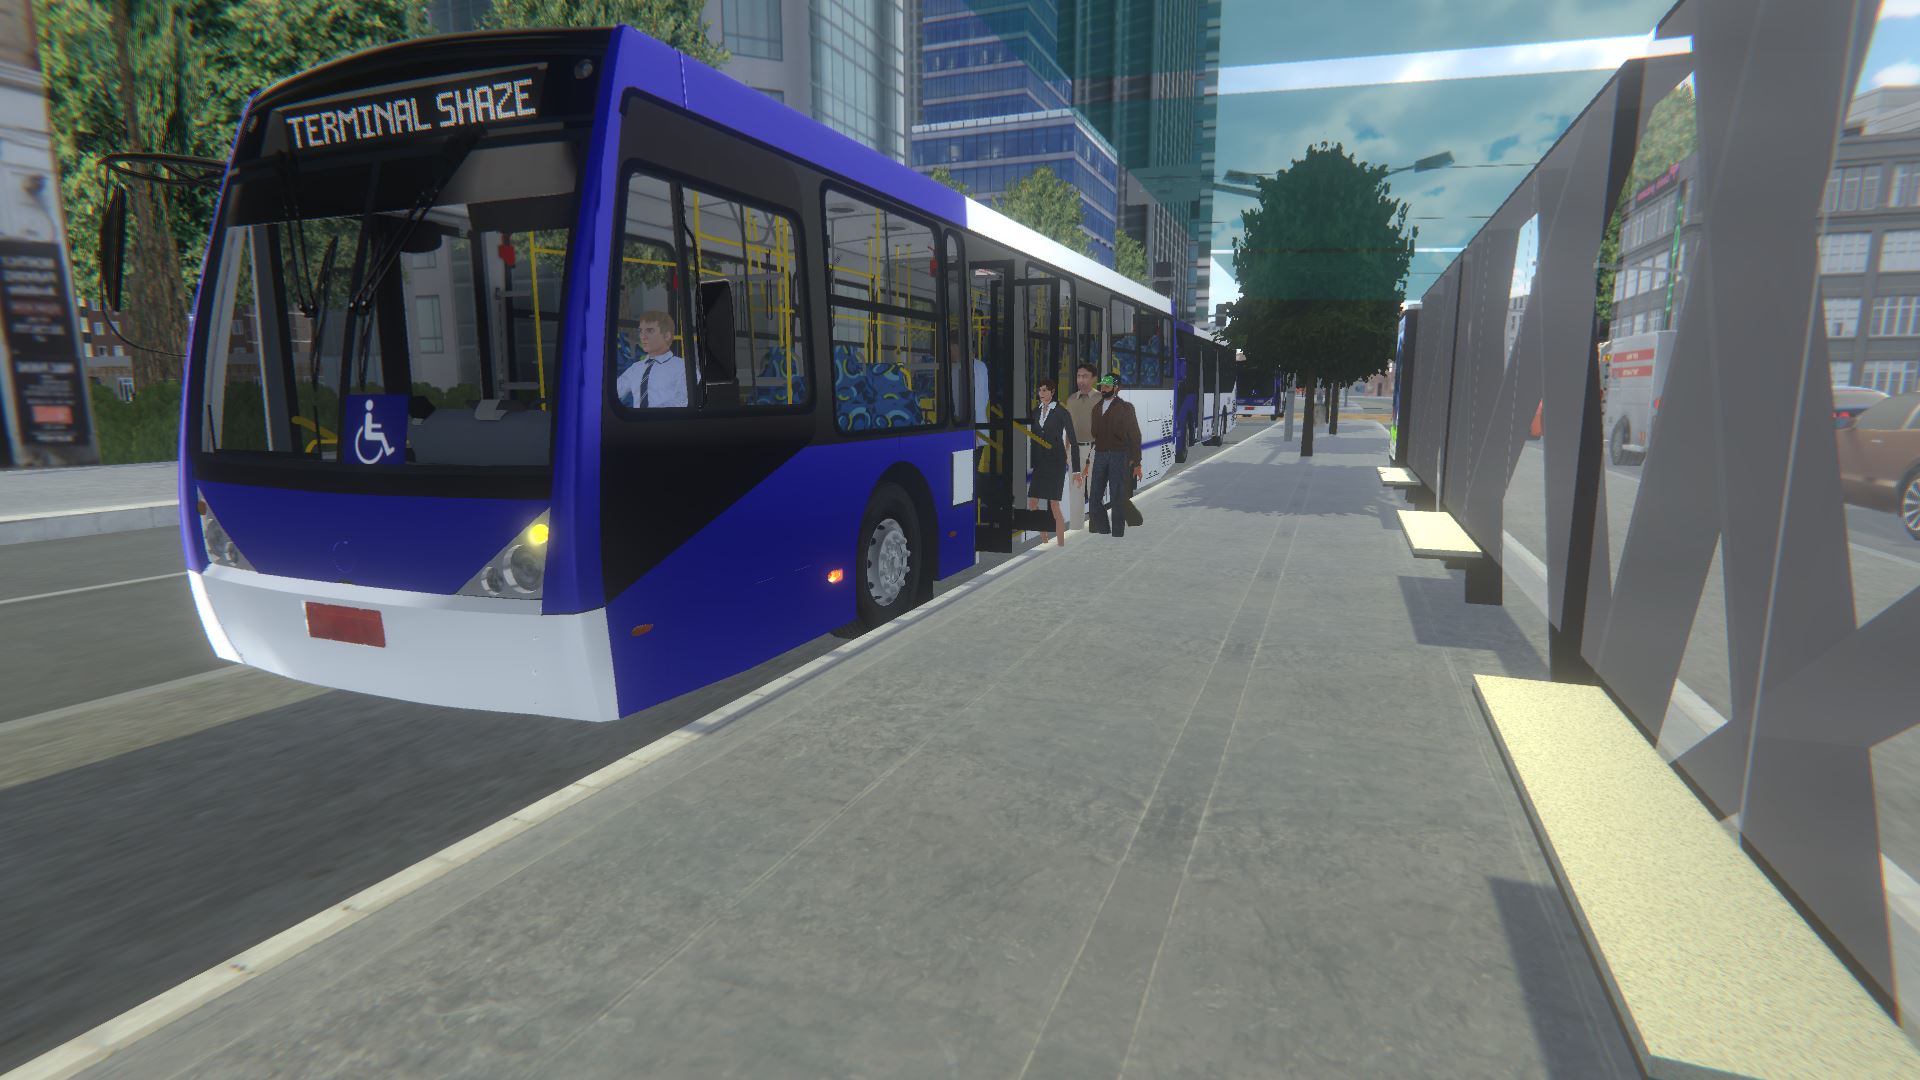 Proton Bus Simulator (BETA) Apk Download for Android- Latest